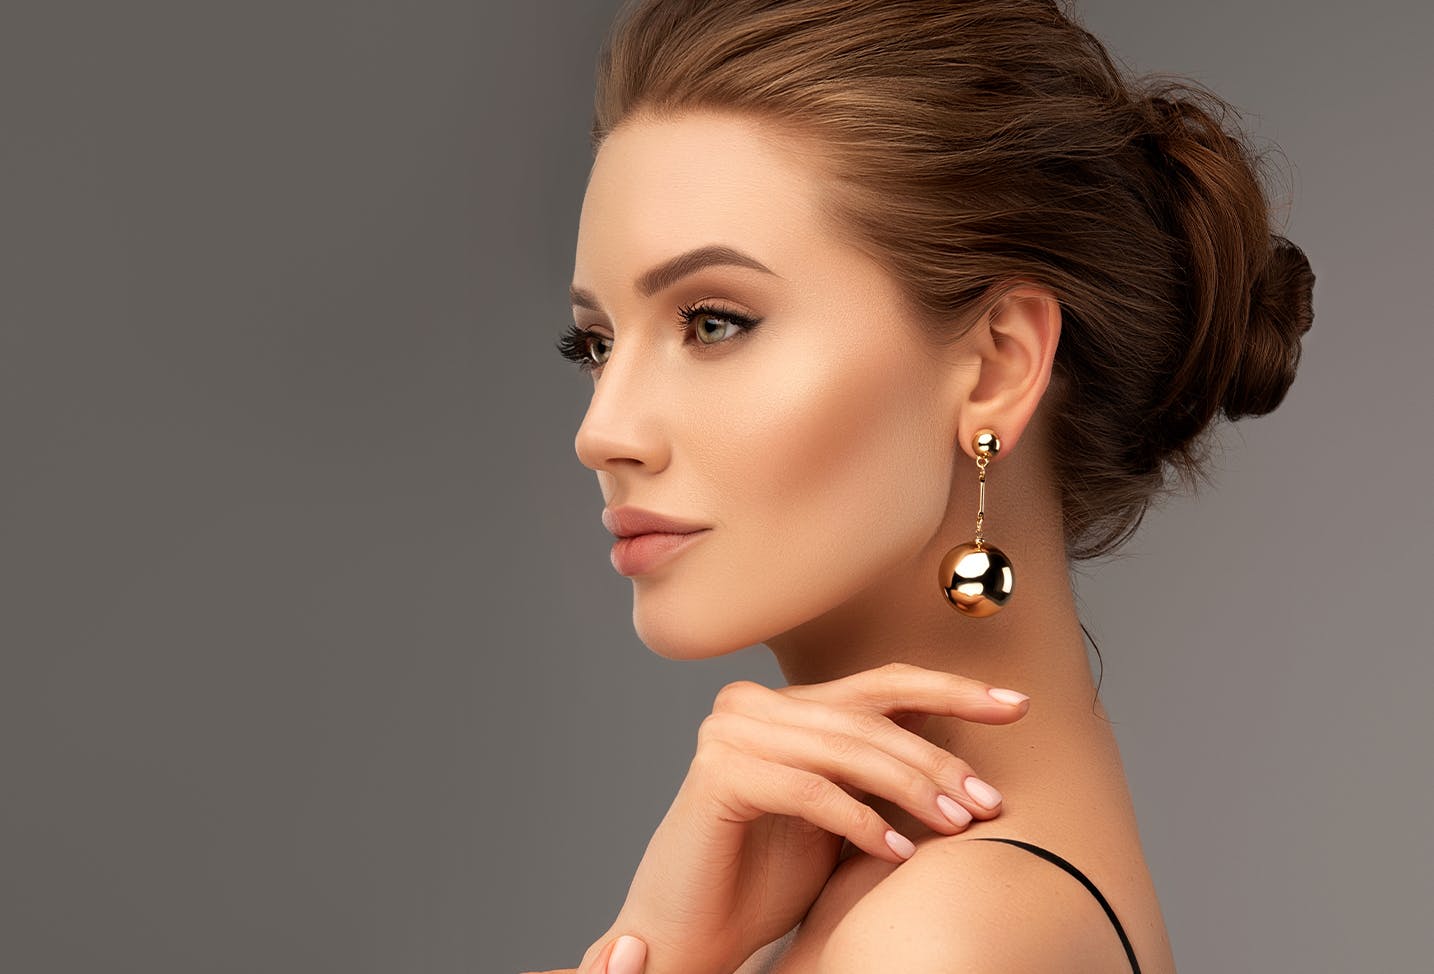 a profile image of a woman with brunette hair wearing a hanging gold earring